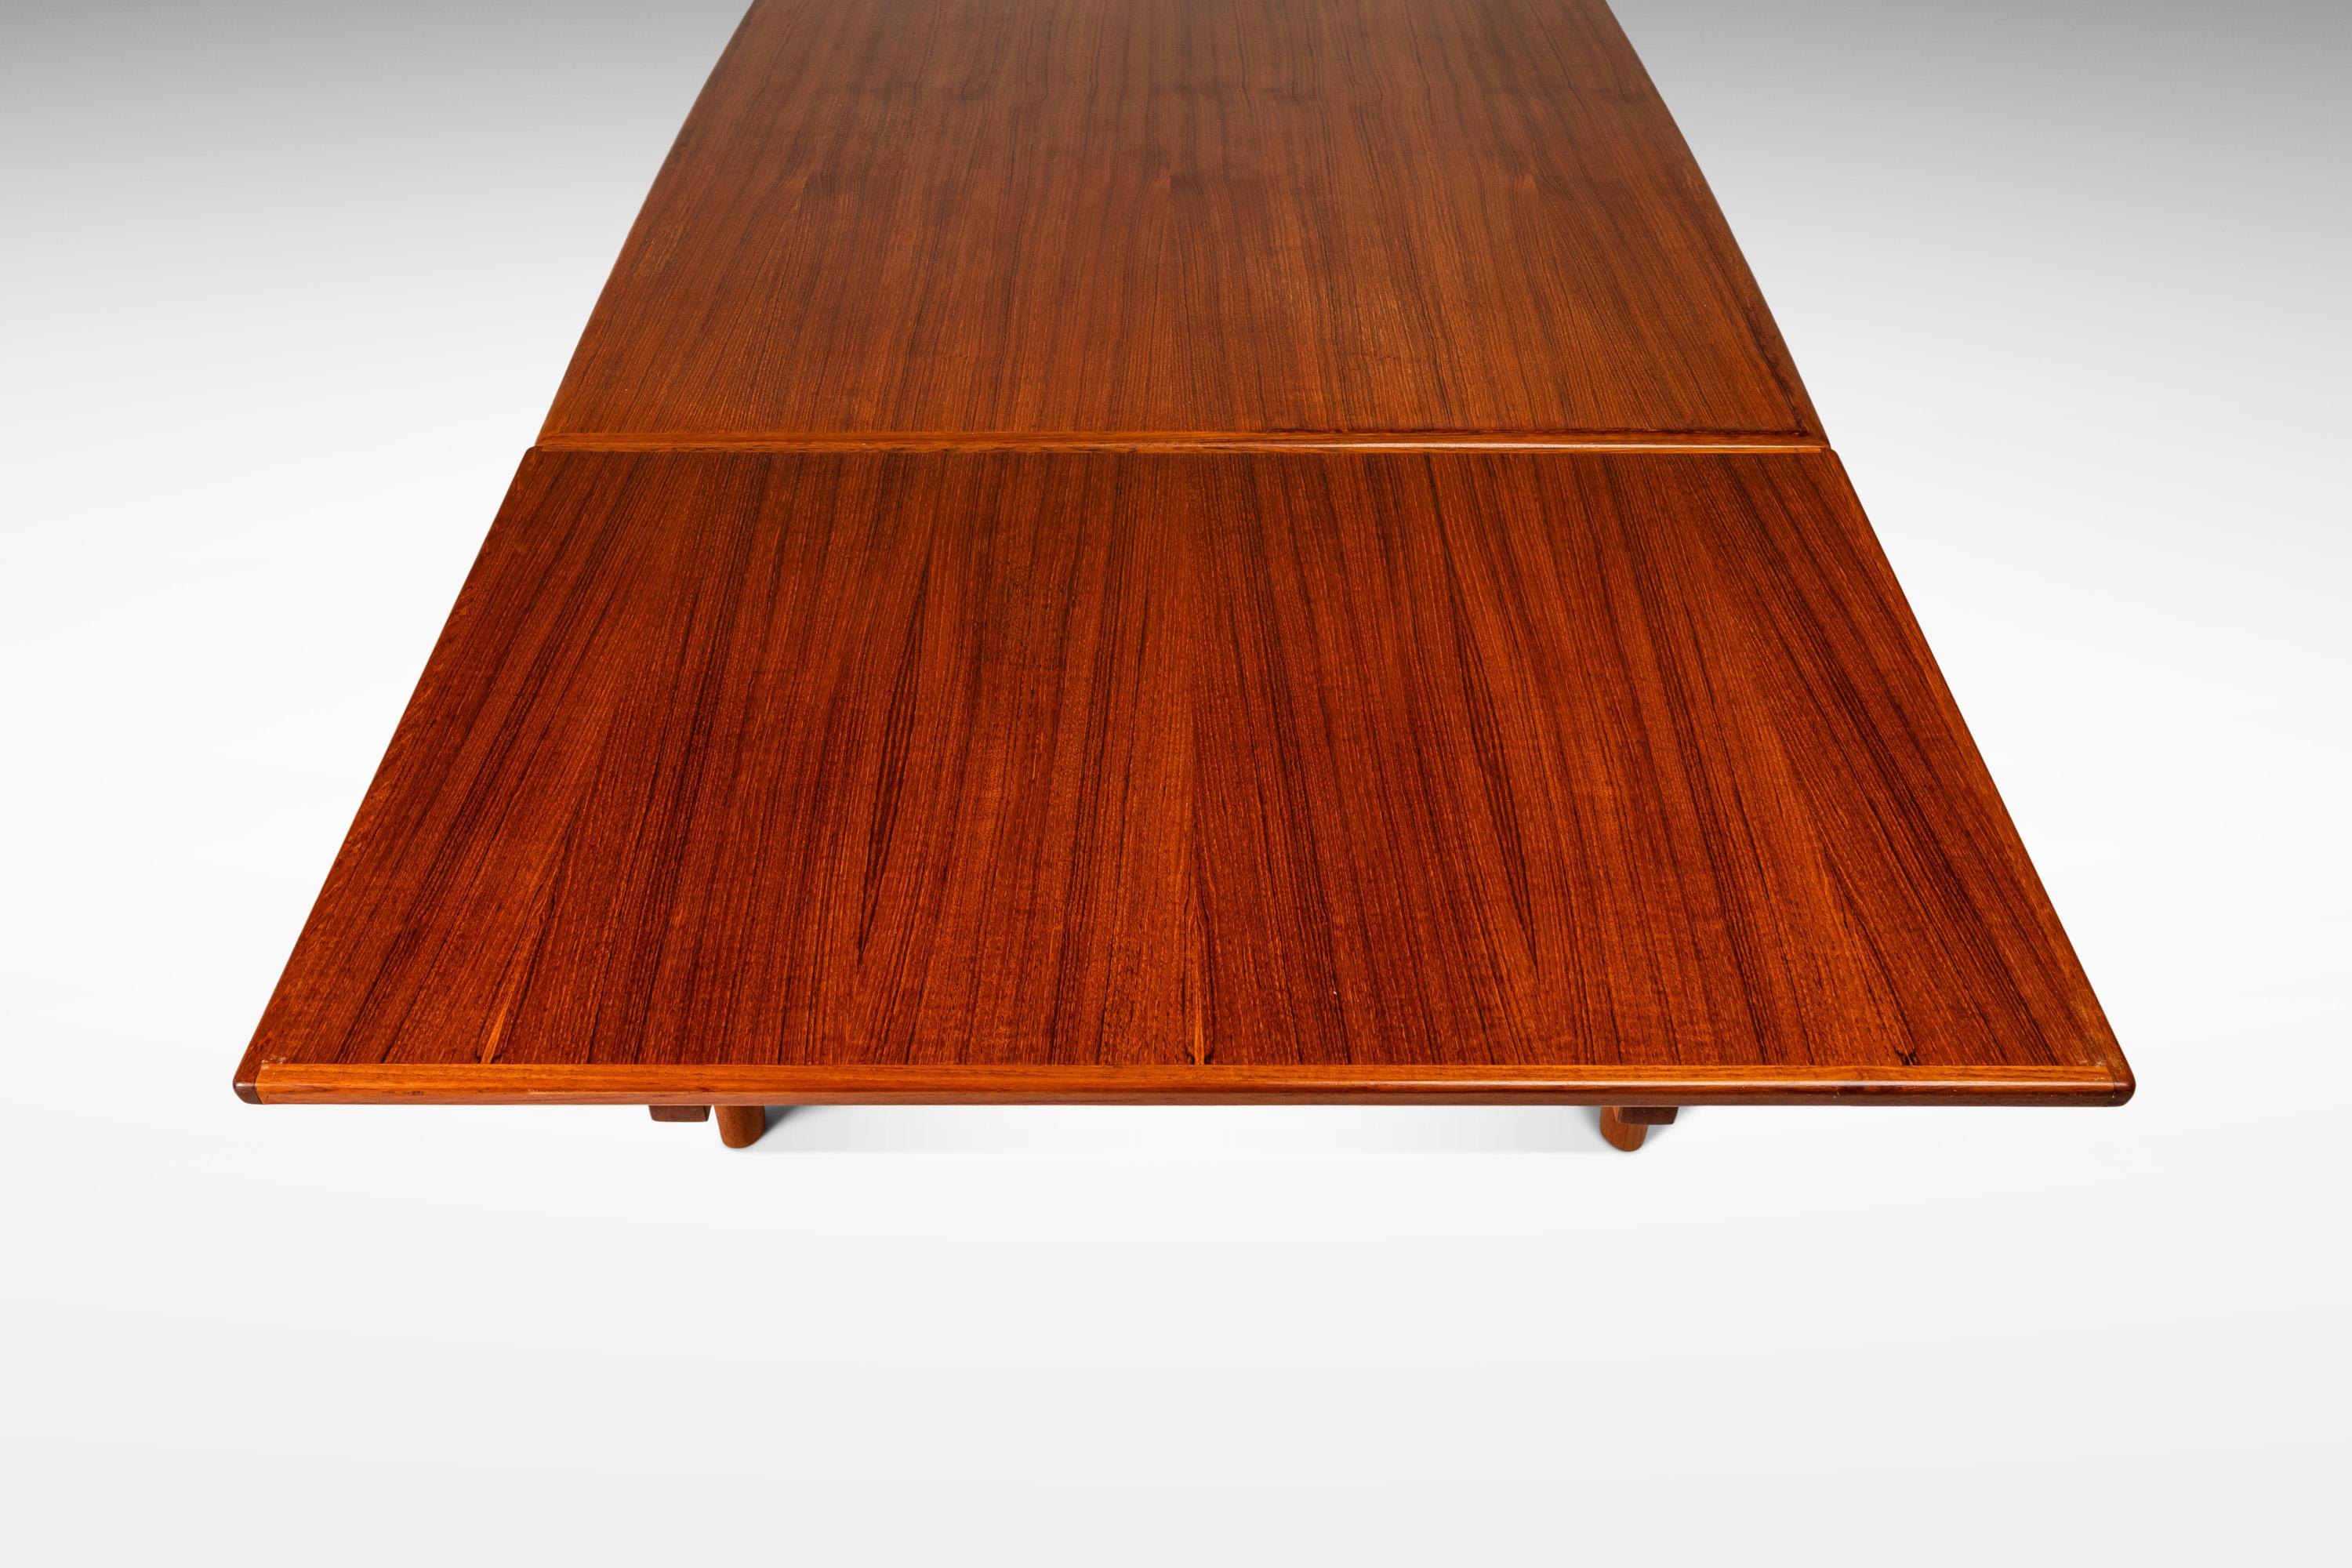 Danish Modern Expansion Dining Table in Teak w/ Stow-in-Table Leaves, c. 1960s For Sale 5